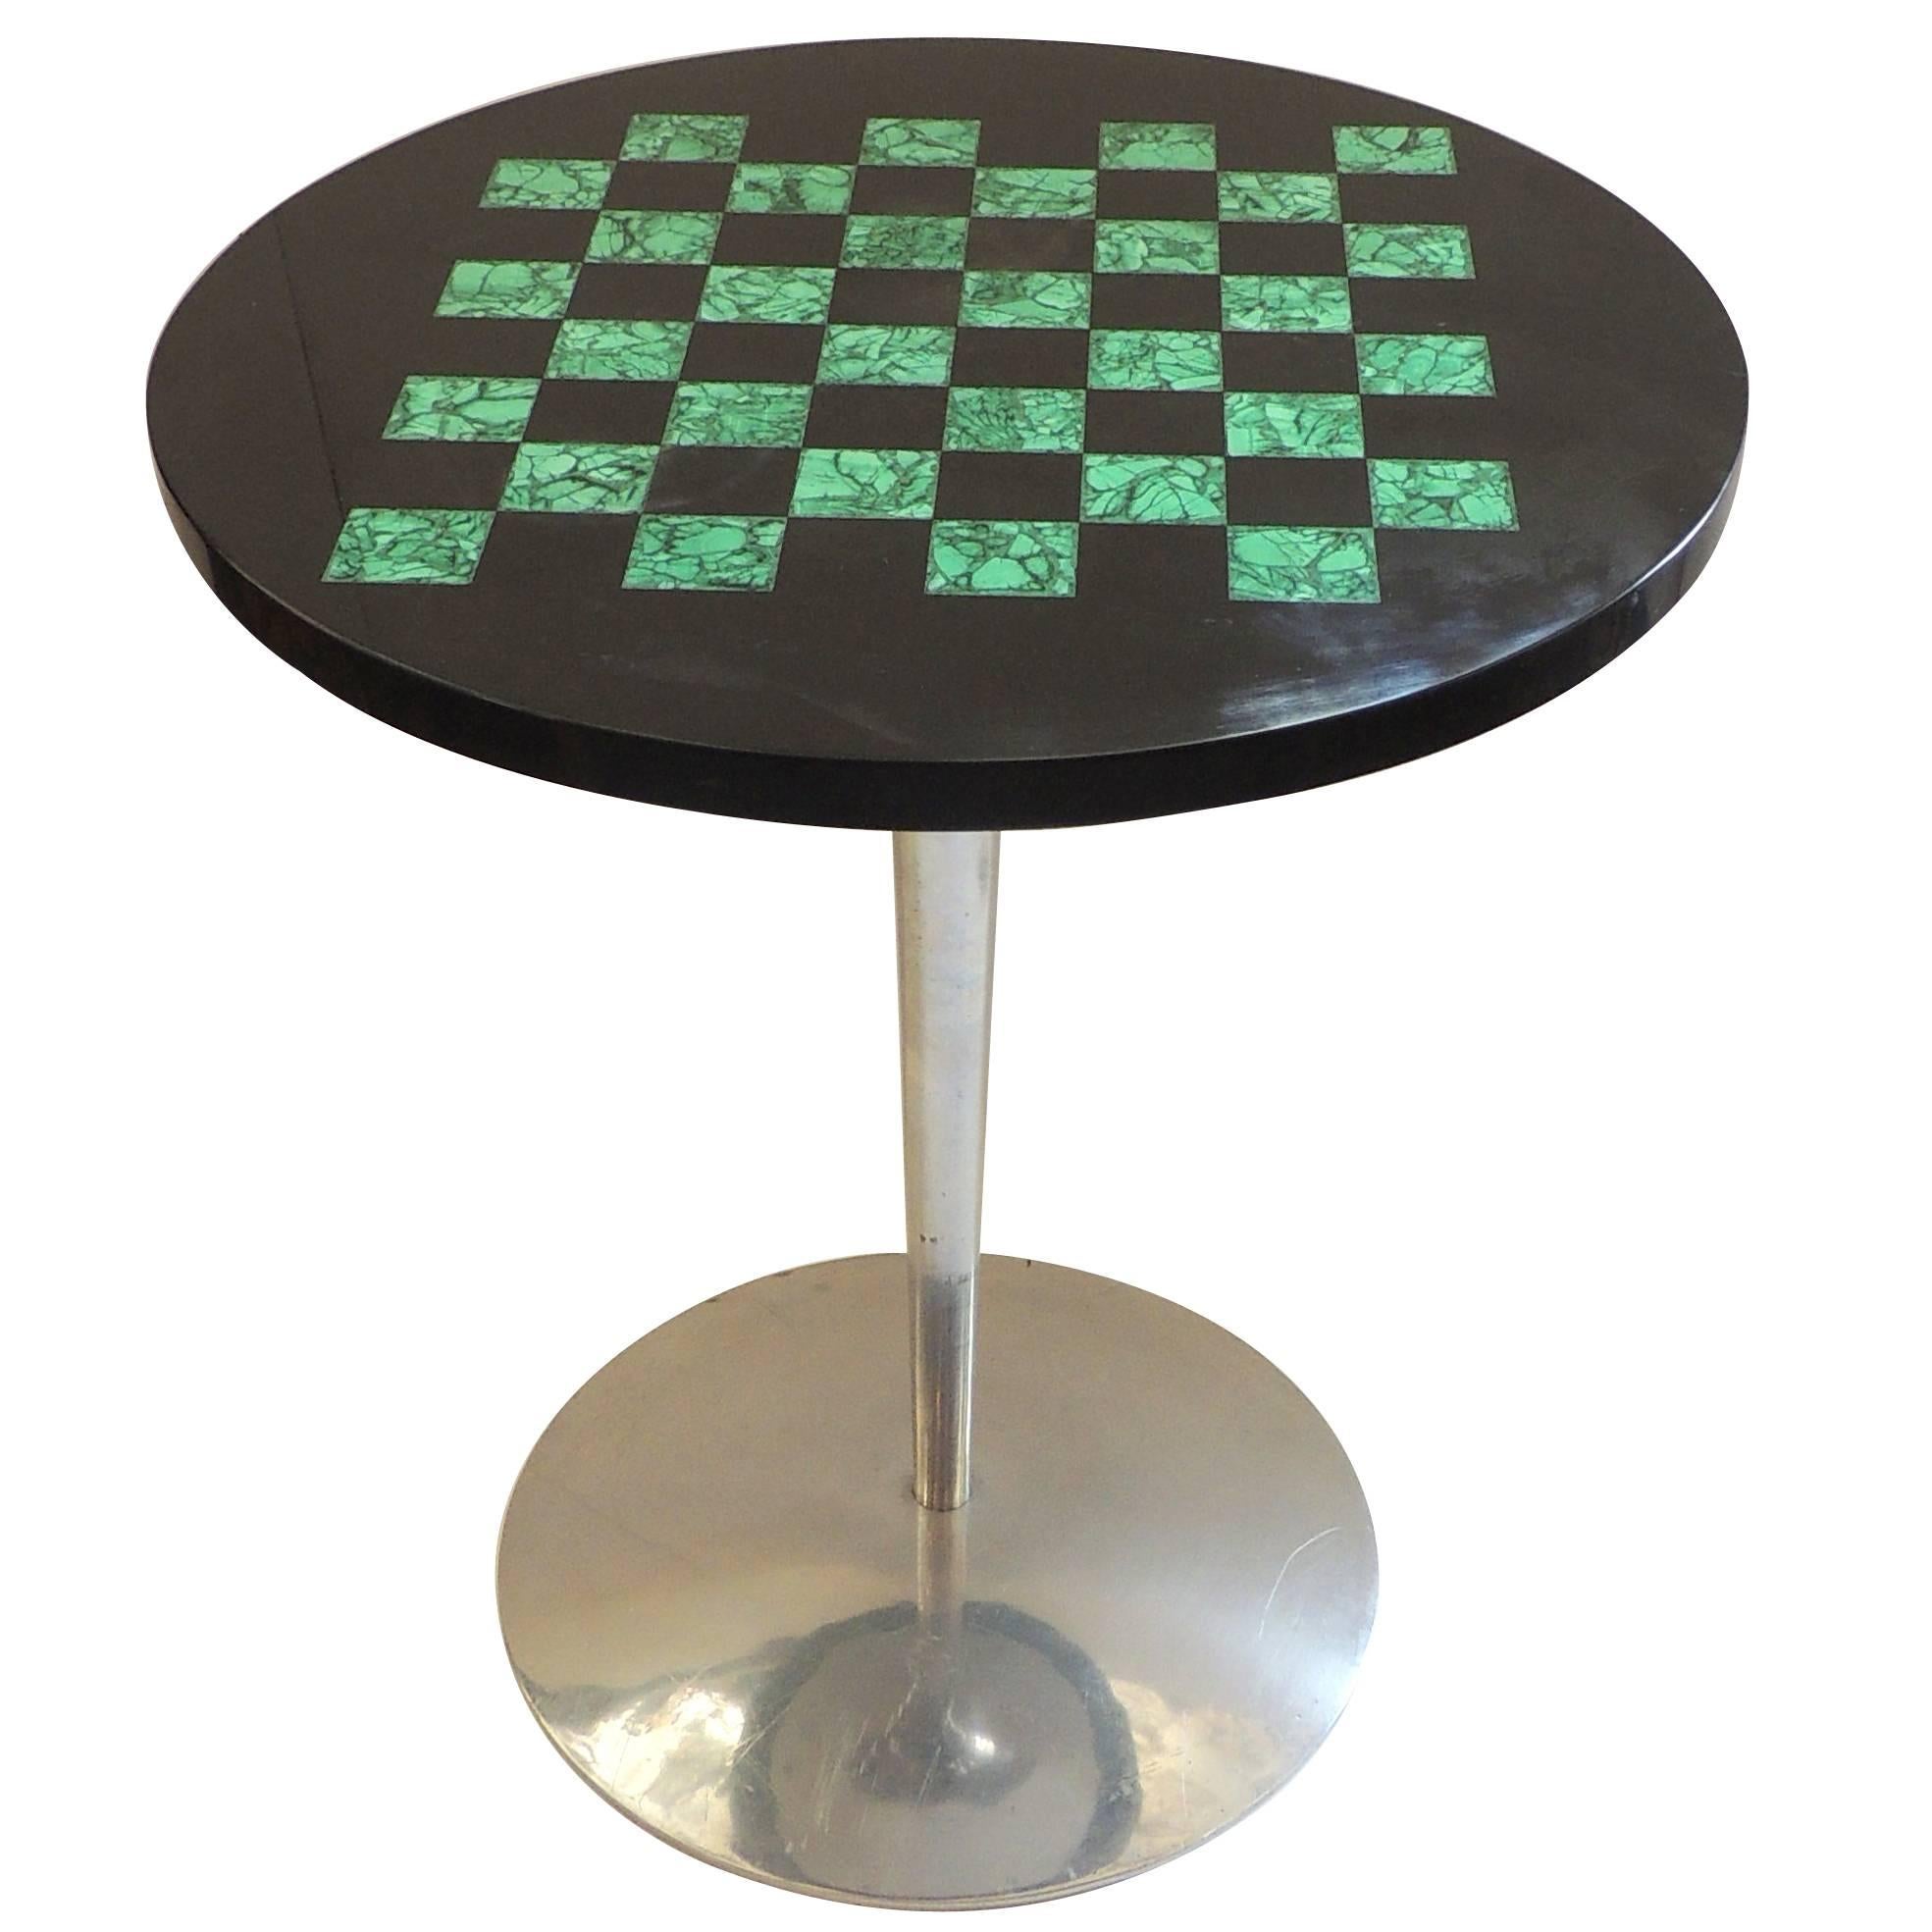 Estelle Laverne Nickel Side Table with Black Marble and Malachite Checker Board